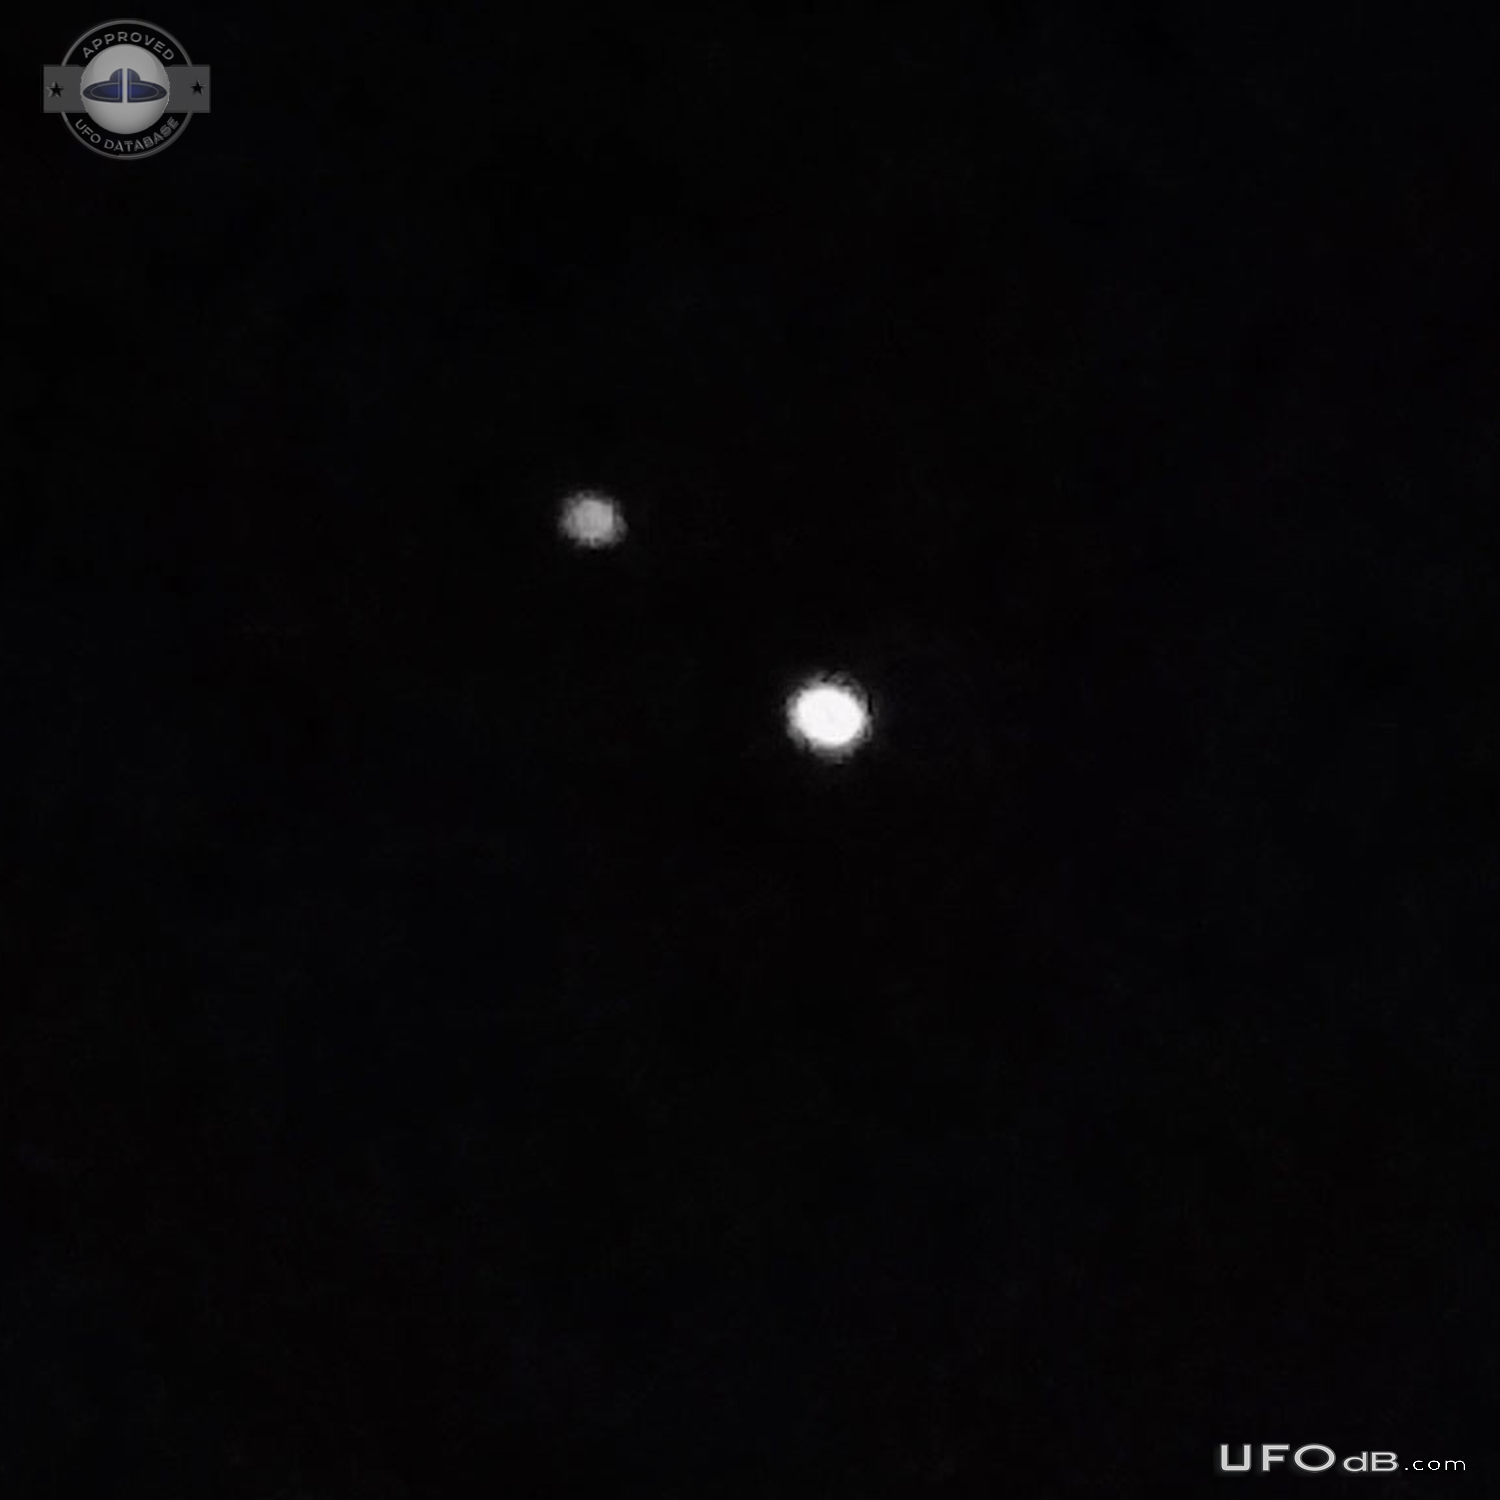 2 extremely bright lit objects stationary in sky for lenghthy period UFO Picture #744-3